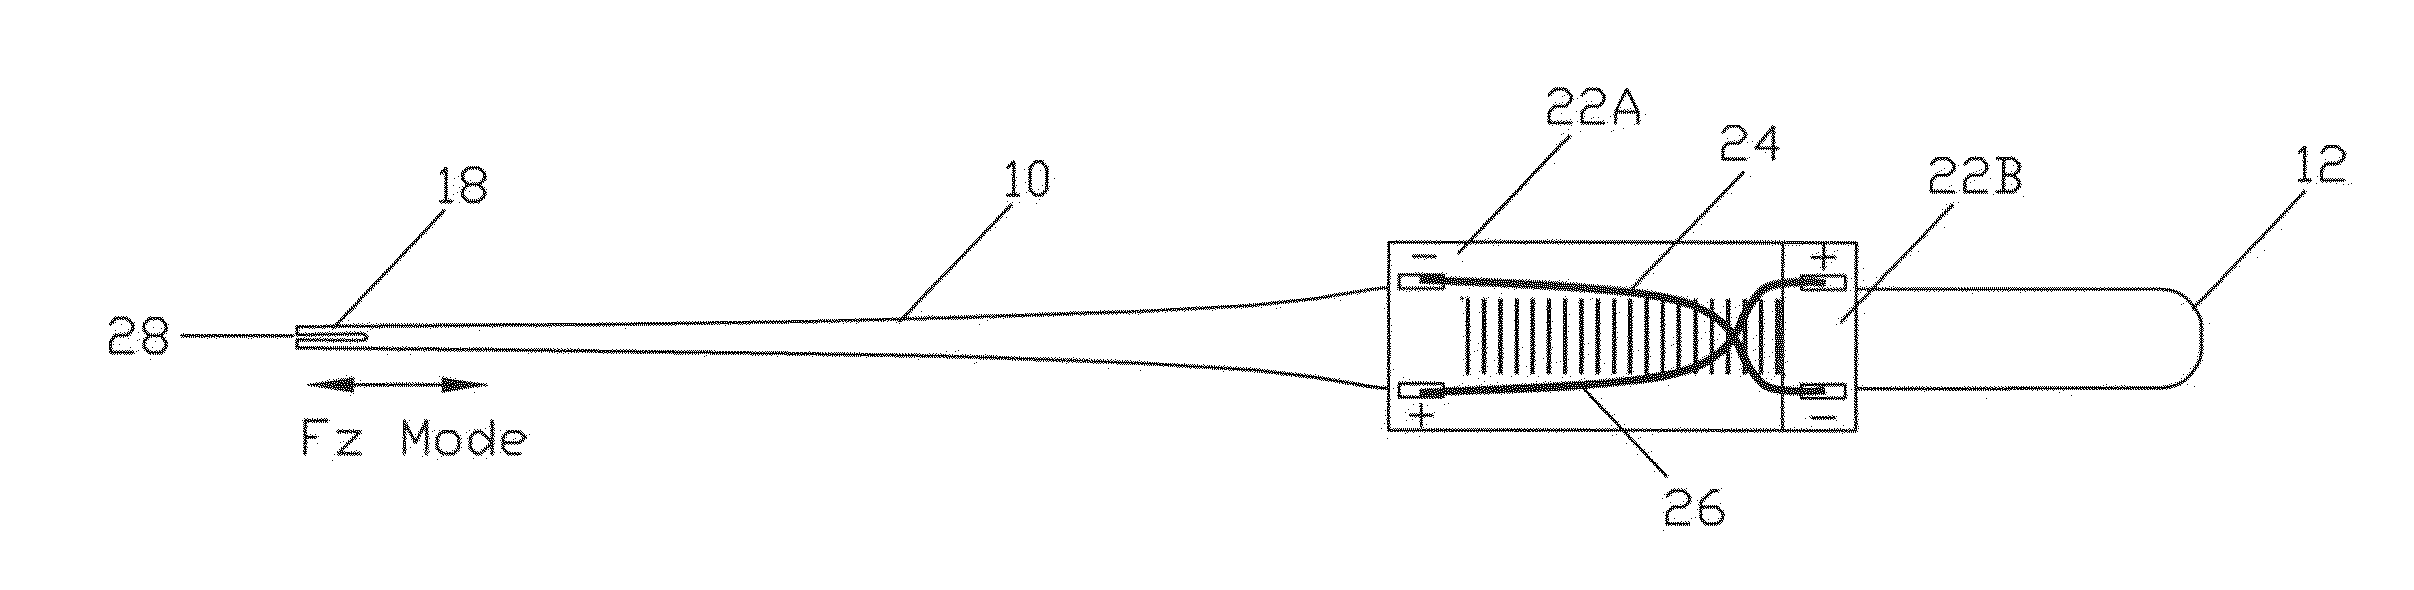 Surgical device employing a cantilevered beam dissector